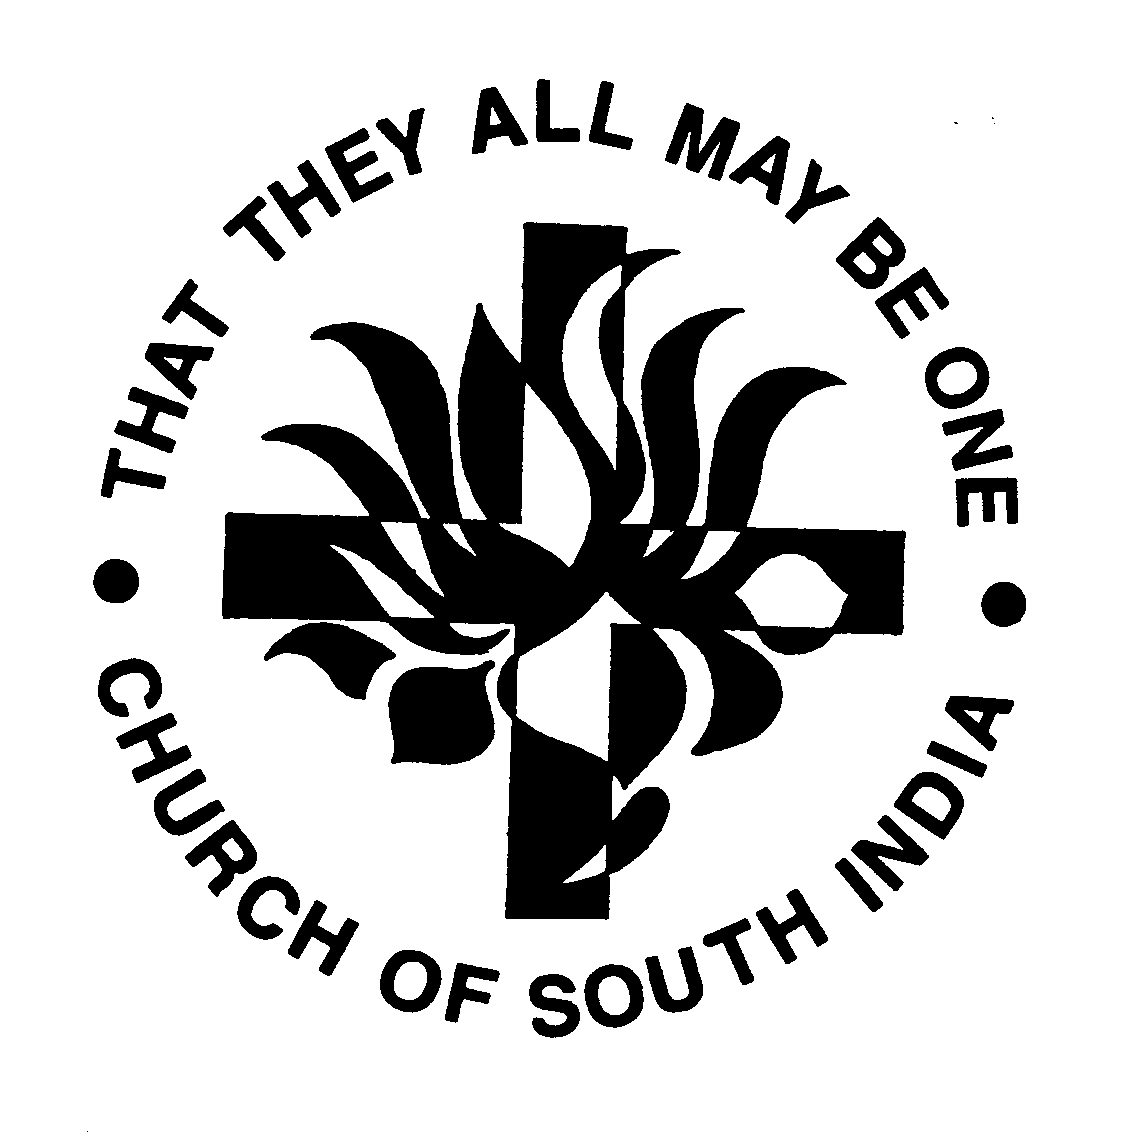 Church Of South India That They All May Be One - Church Of South India Trademark Registration